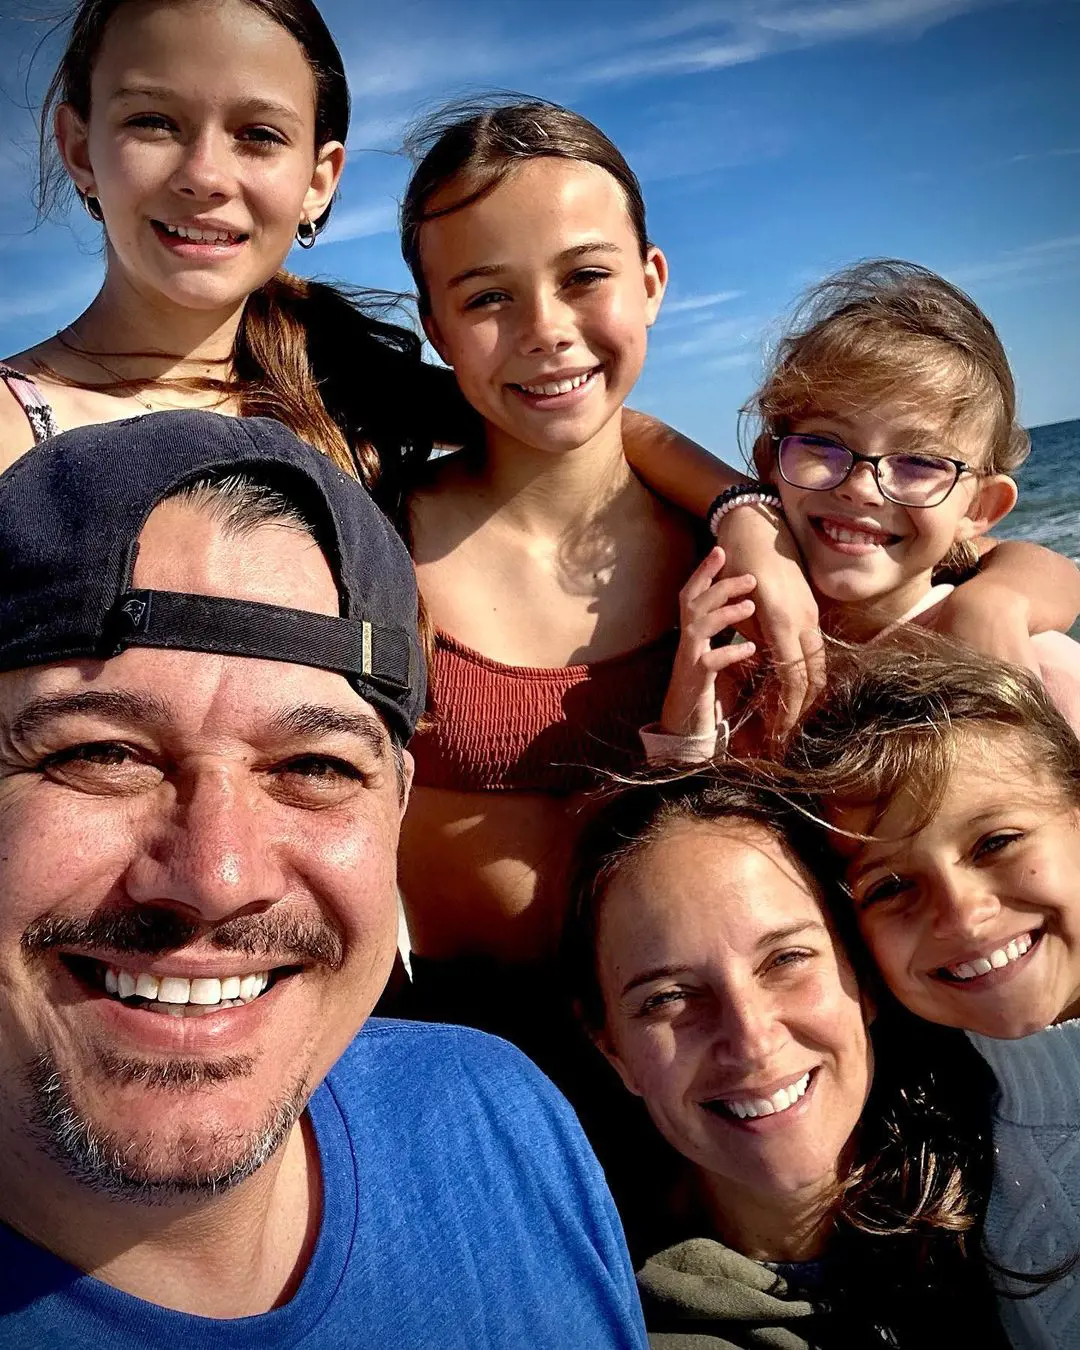 Mariano visited beach with his family in February 2023